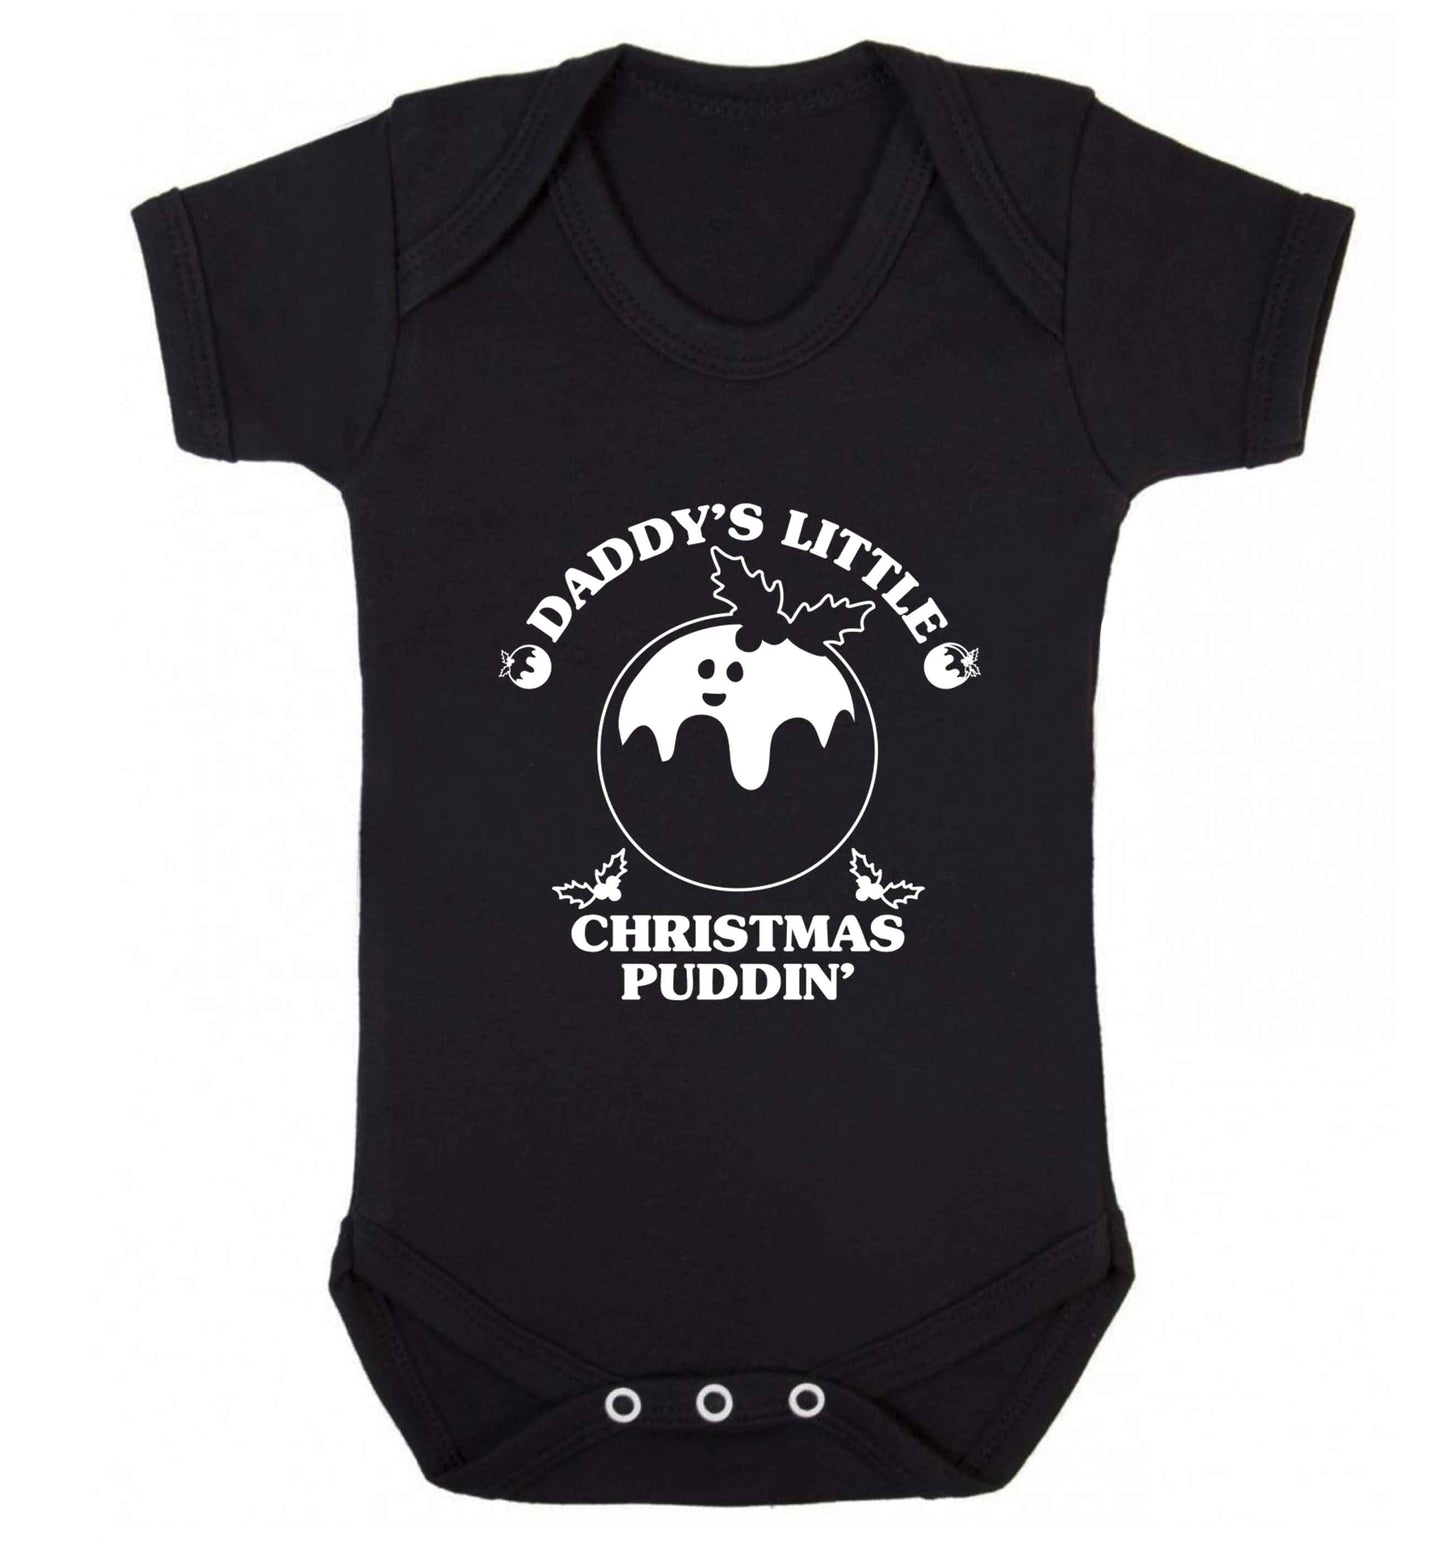 Daddy's little Christmas puddin' Baby Vest black 18-24 months